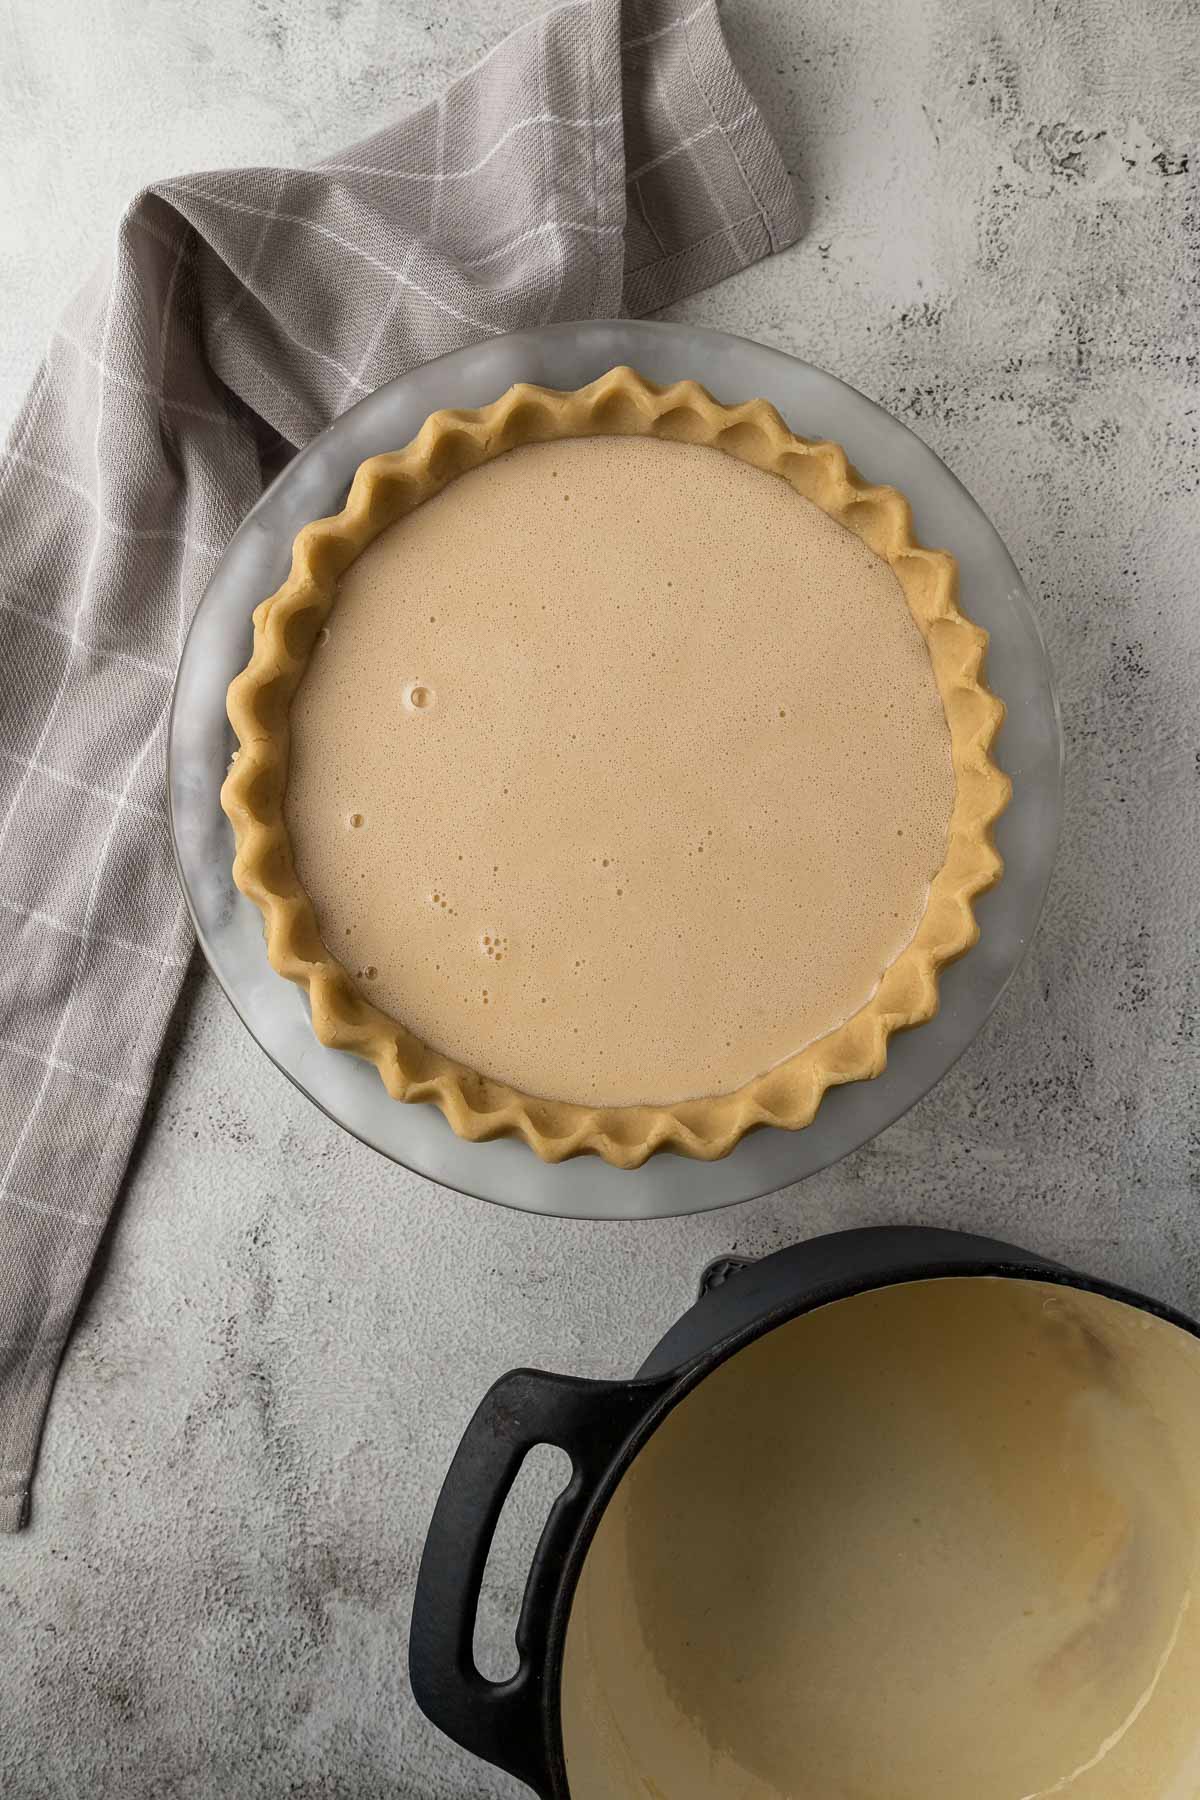 milk tart filling poured into the crust